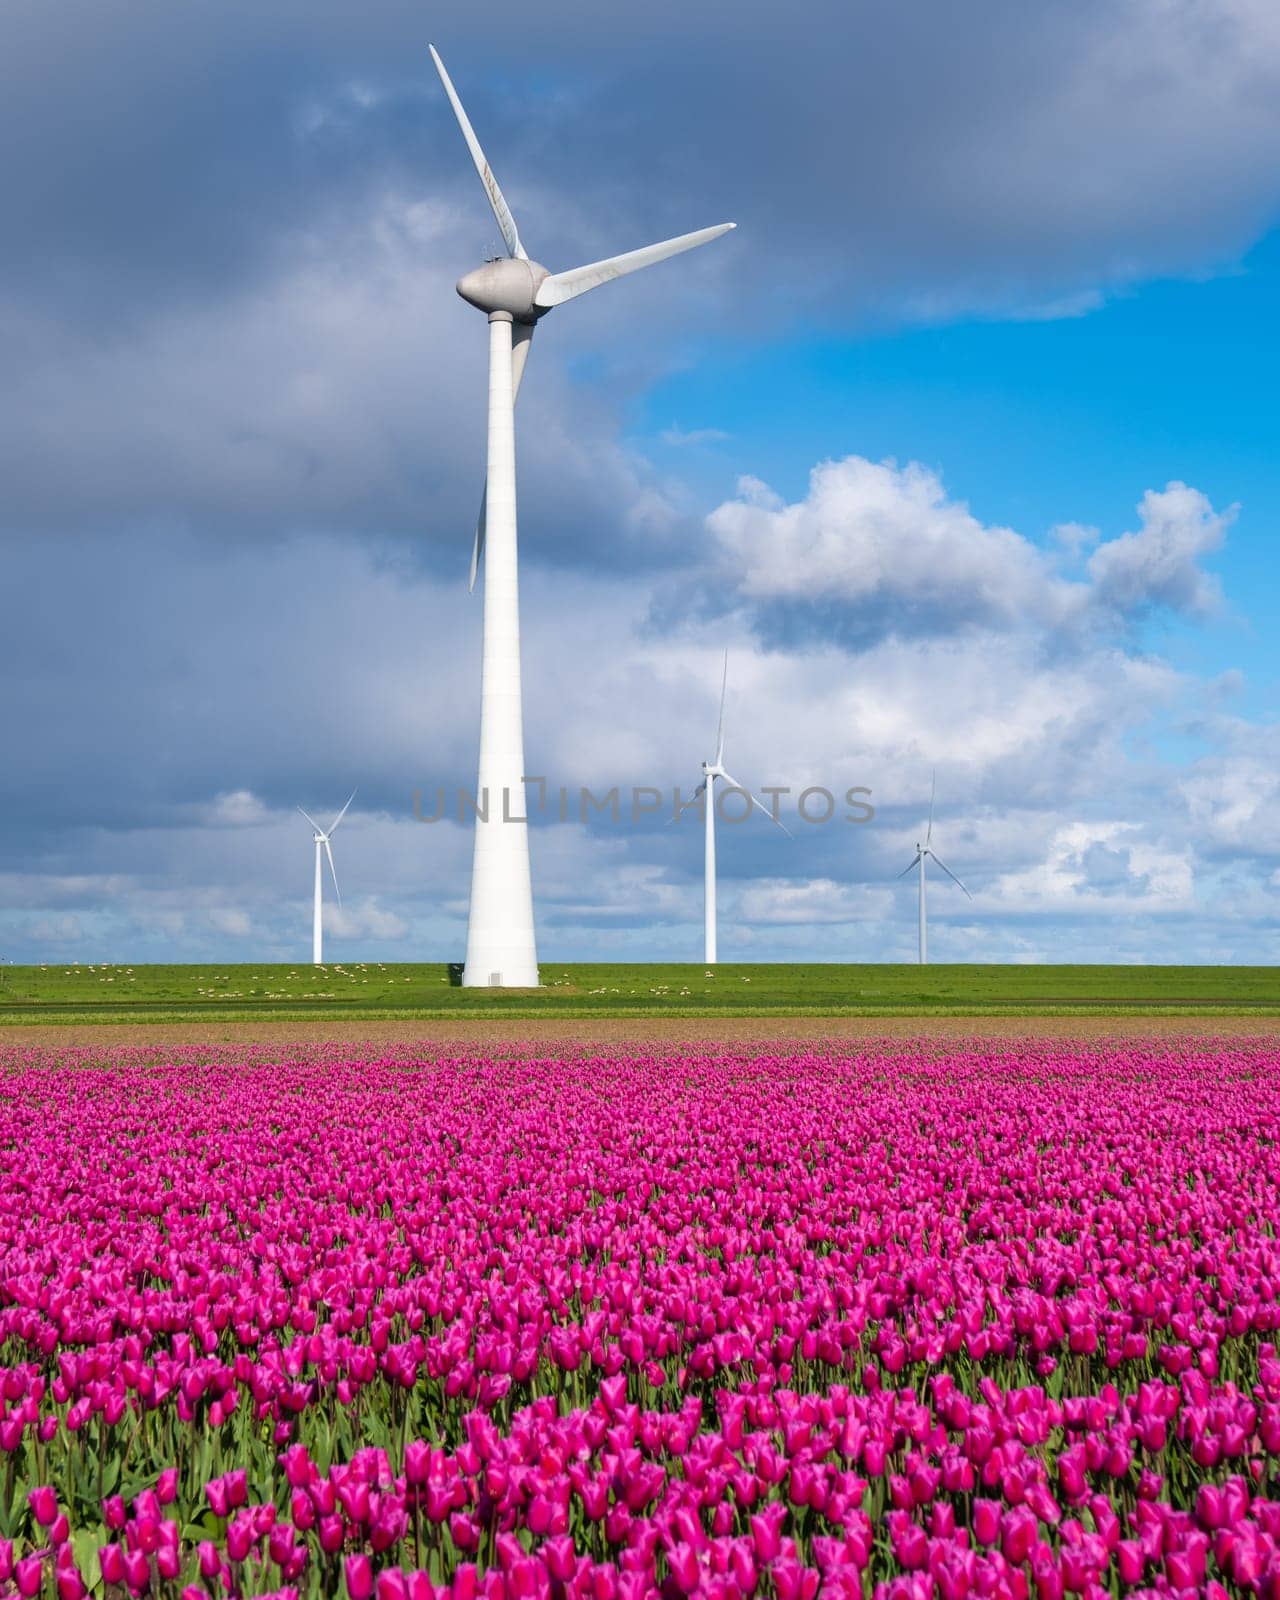 A field of vibrant purple tulips stretches as far as the eye can see, with a huge windmill turbine standing tall in the background against a clear blue sky. in the Noordoostpolder Netherlands